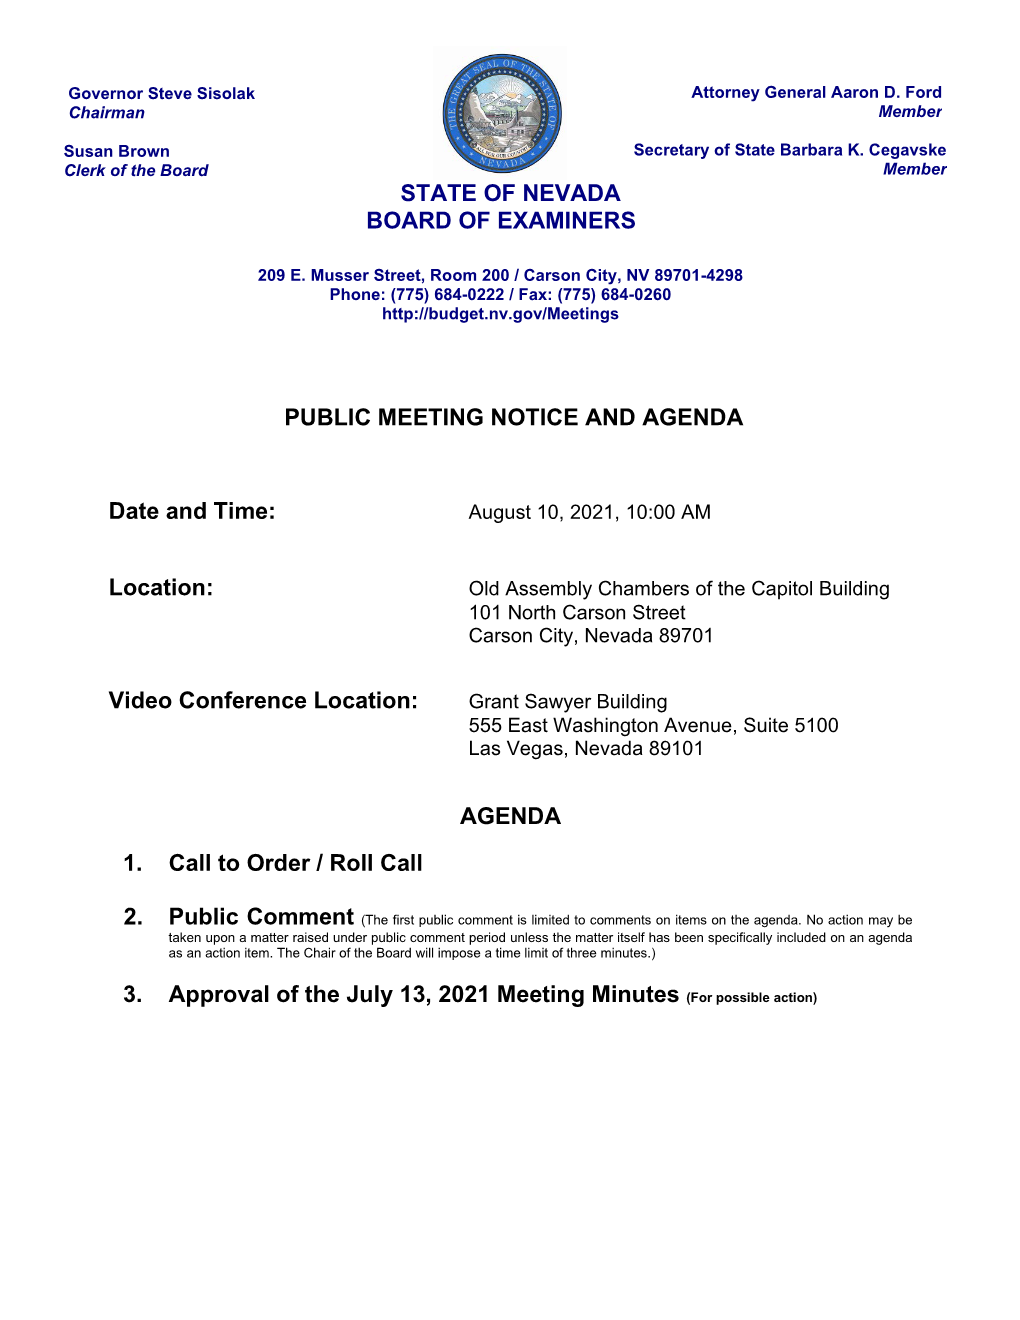 State of Nevada Board of Examiners Public Meeting